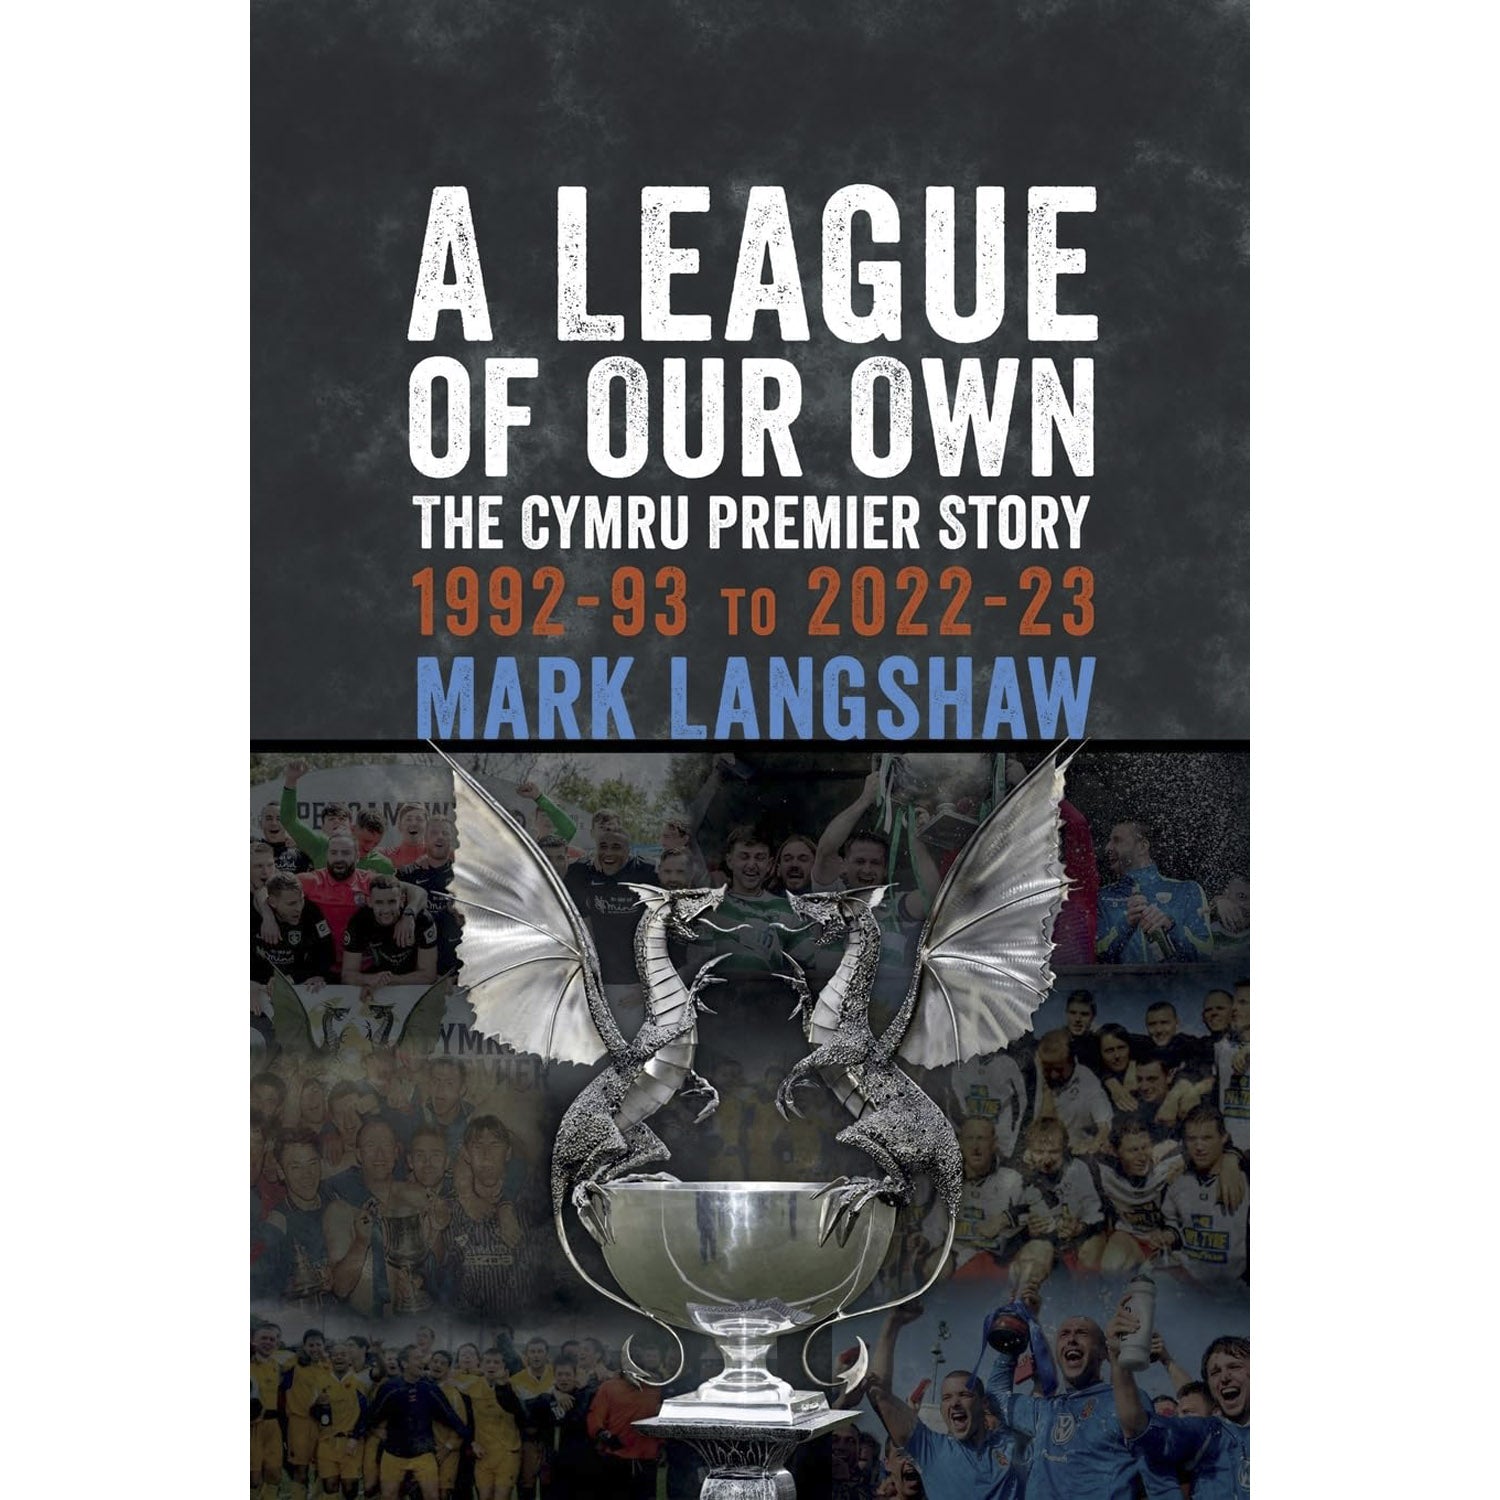 A League of Our Own – The Cymru Premier Story 1992-93 to 2022-23